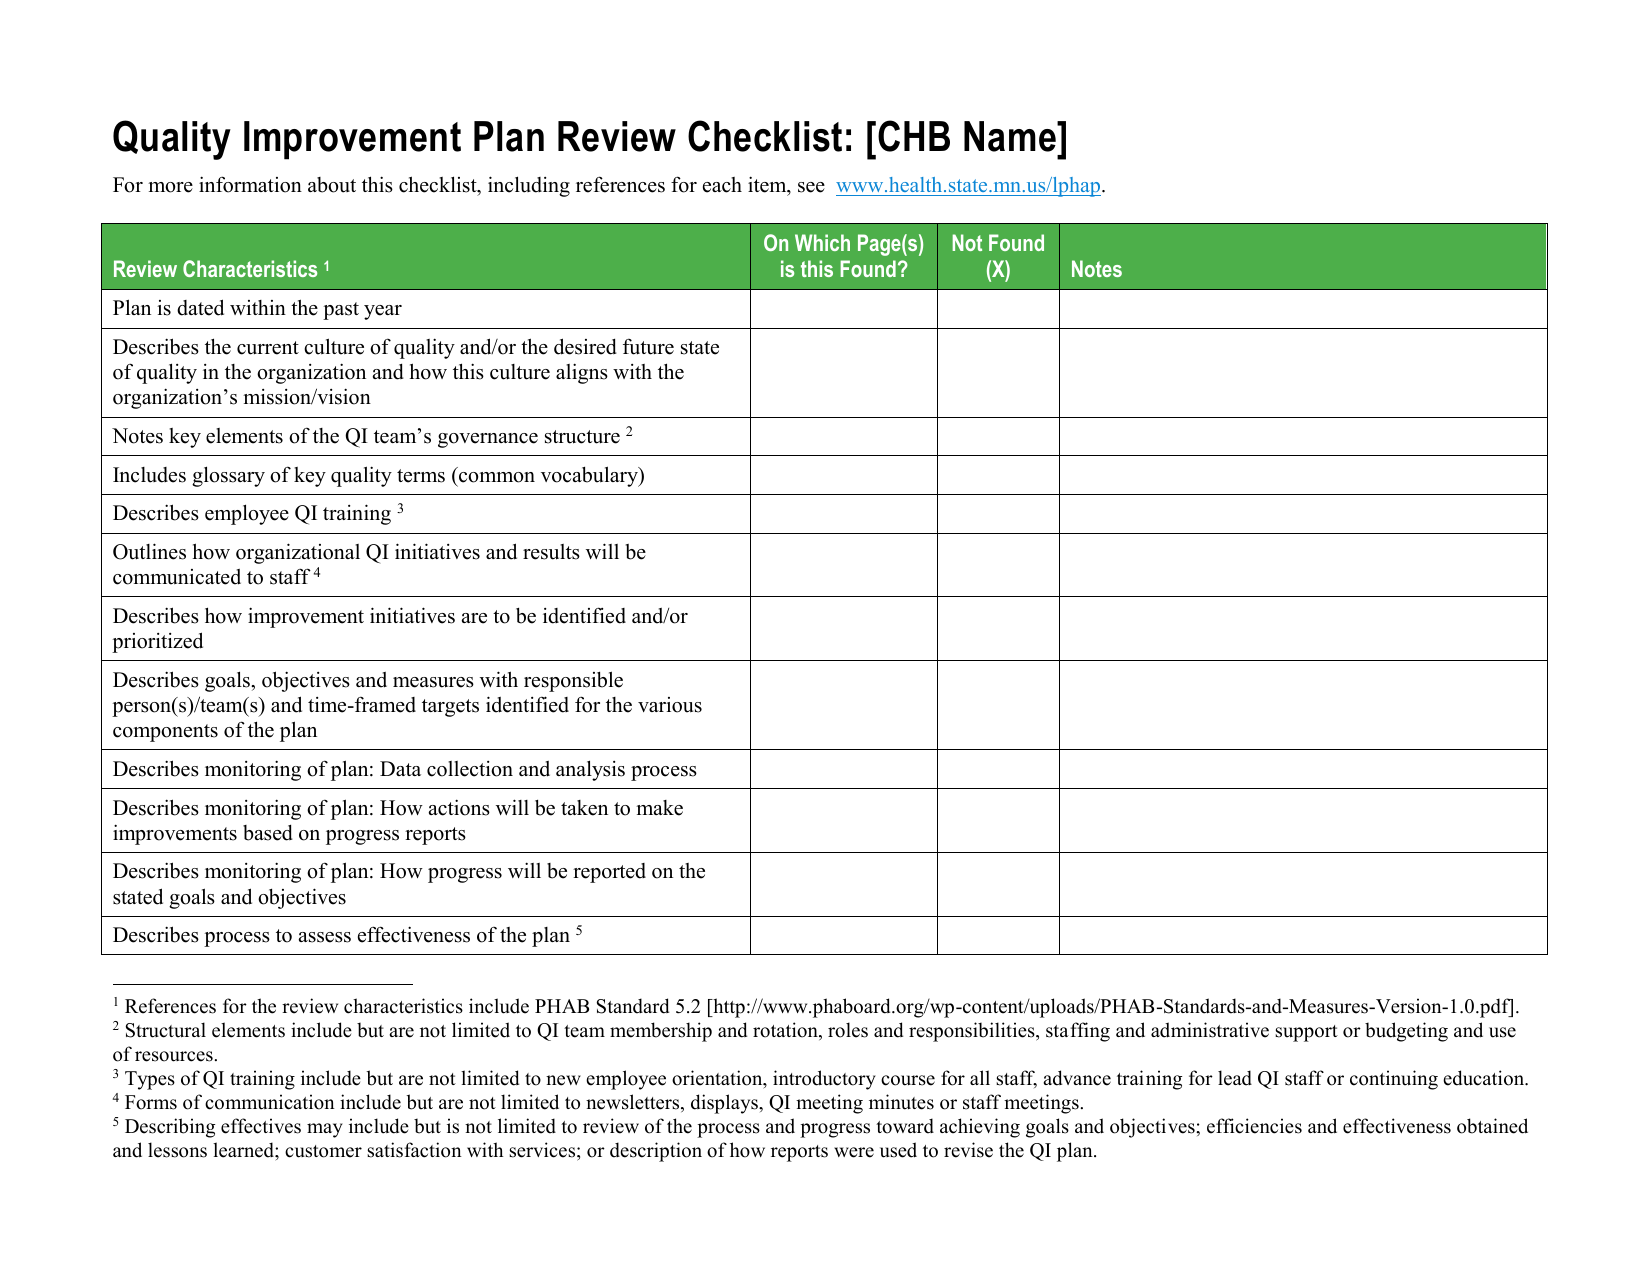 Quality Improvement Plan Review Checklist: CHB Name On Which Page(s